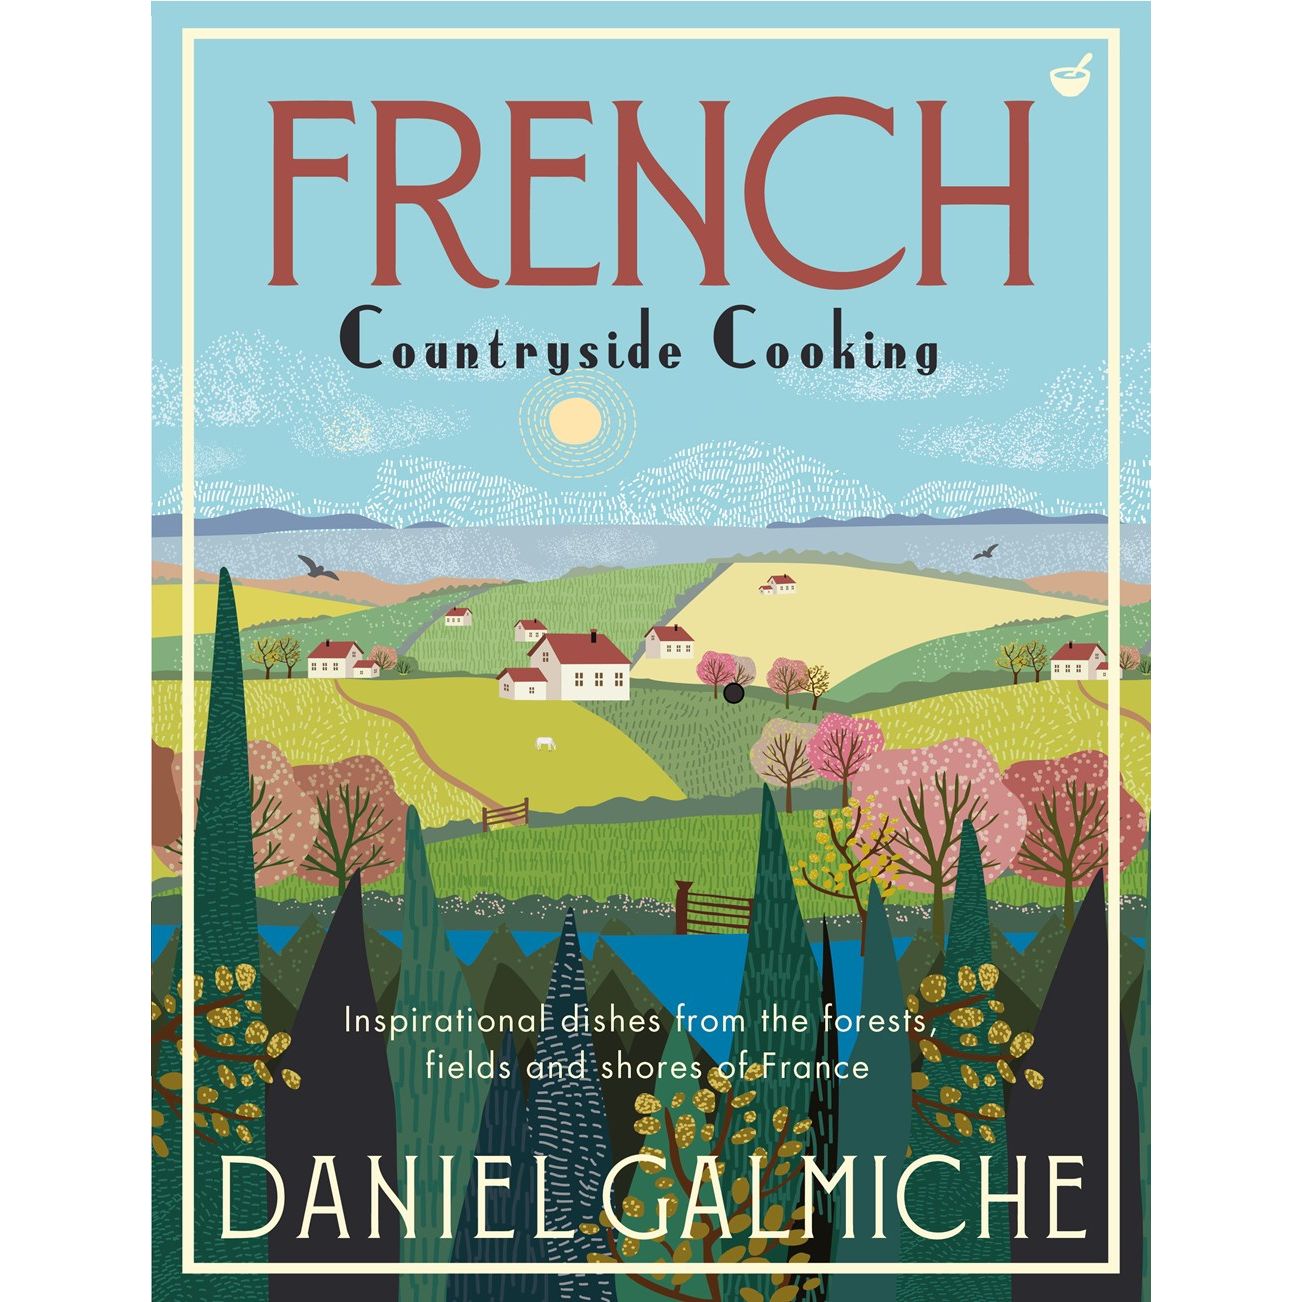 French Countryside Cooking (Daniel Galmiche)